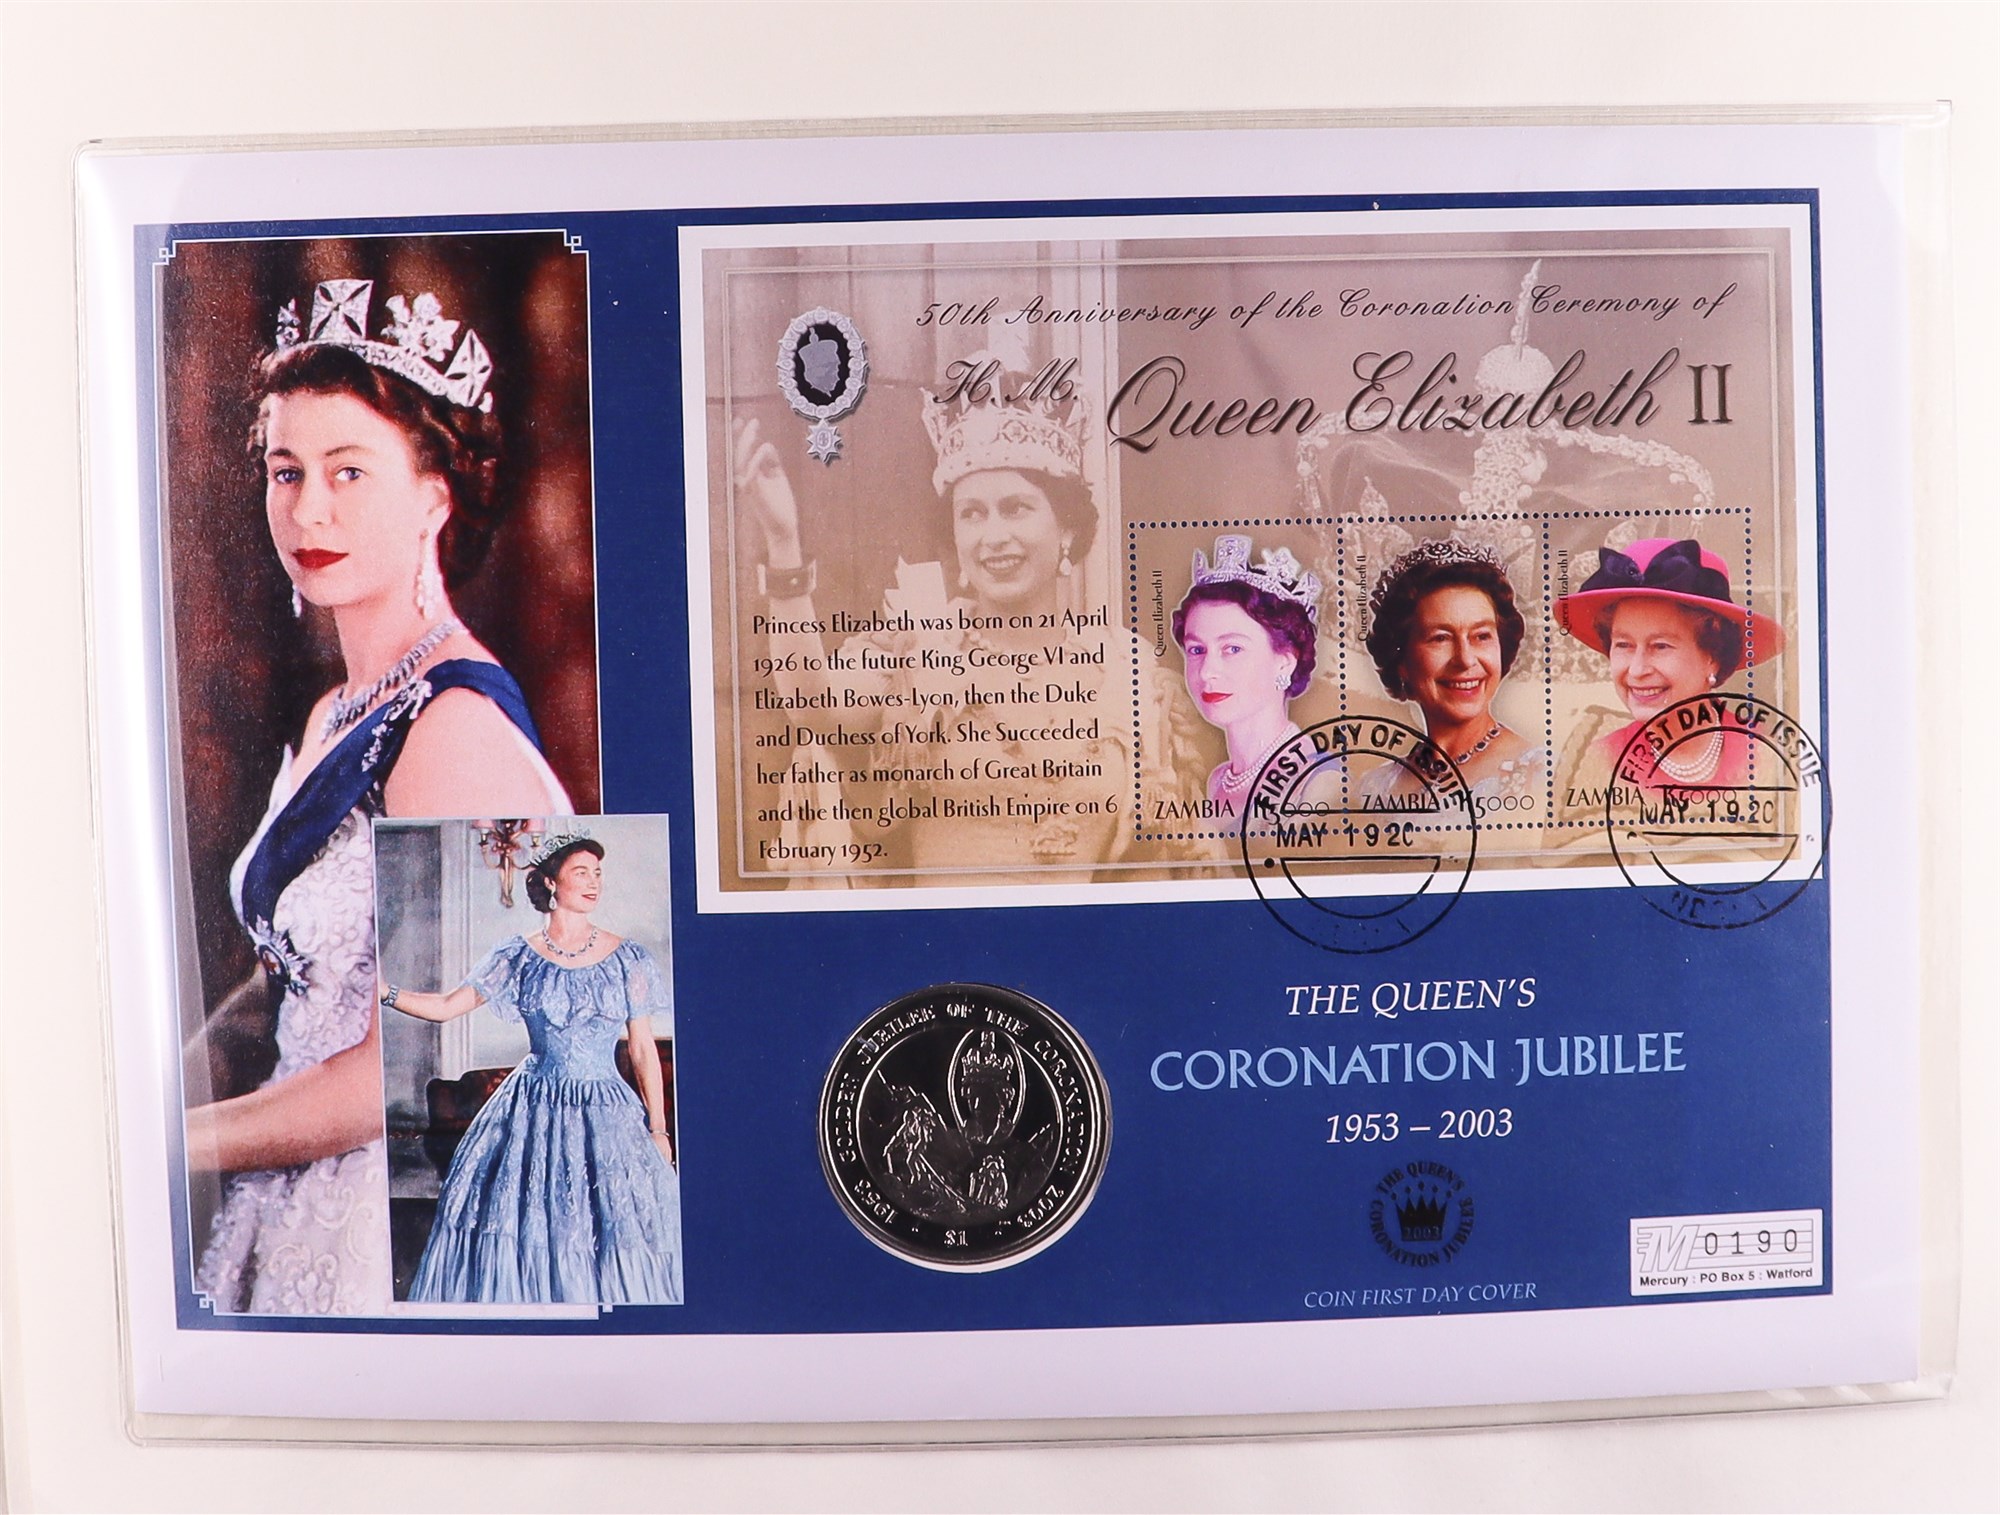 COIN COVERS Several collections in 6 albums of Mercury coin covers - The Royal Family 1996-2006 in